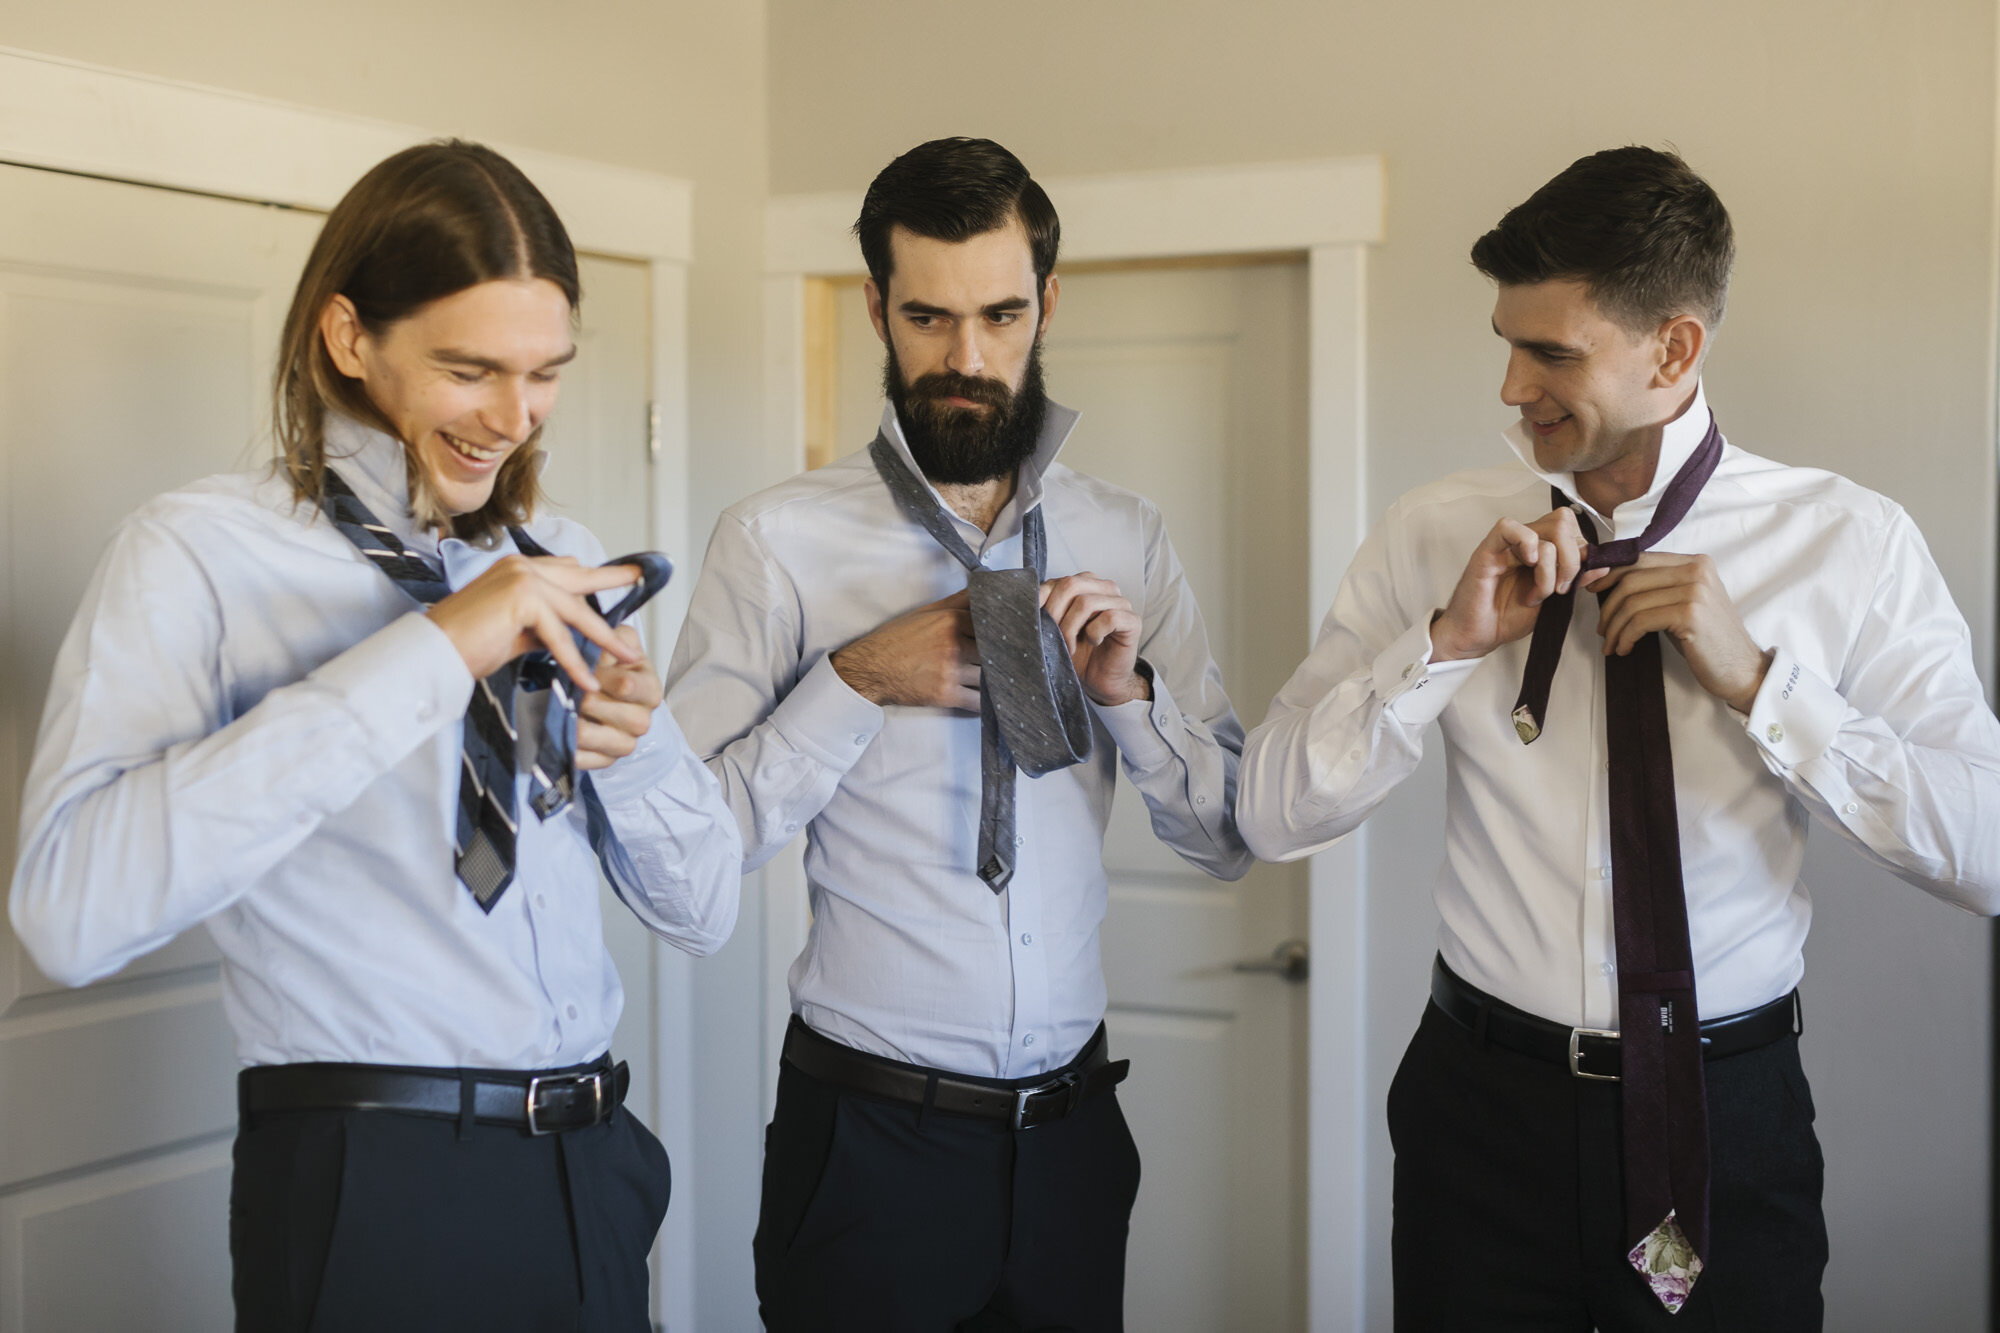 Groom and his brothers tie their ties together